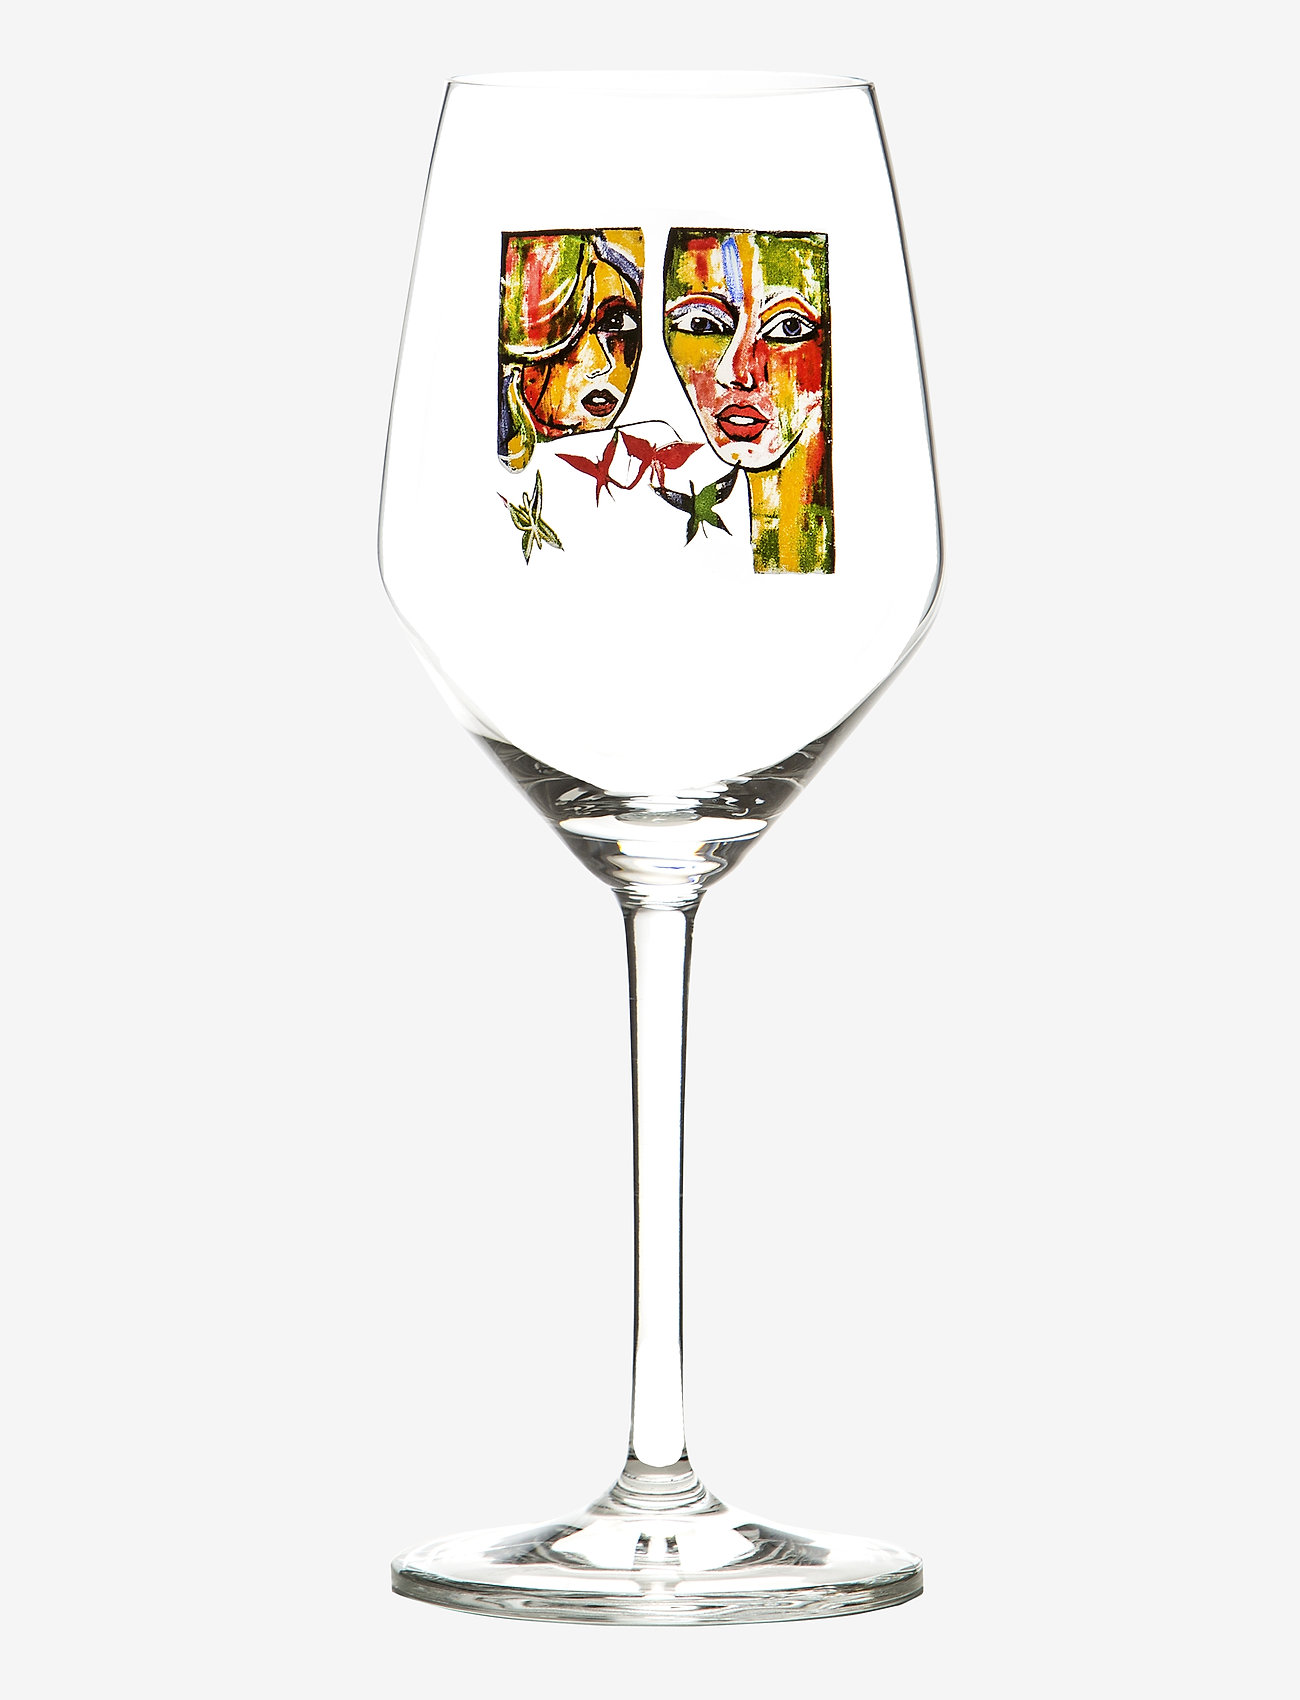 Carolina Gynning - In Love - white wine glasses - clear with decal - 0